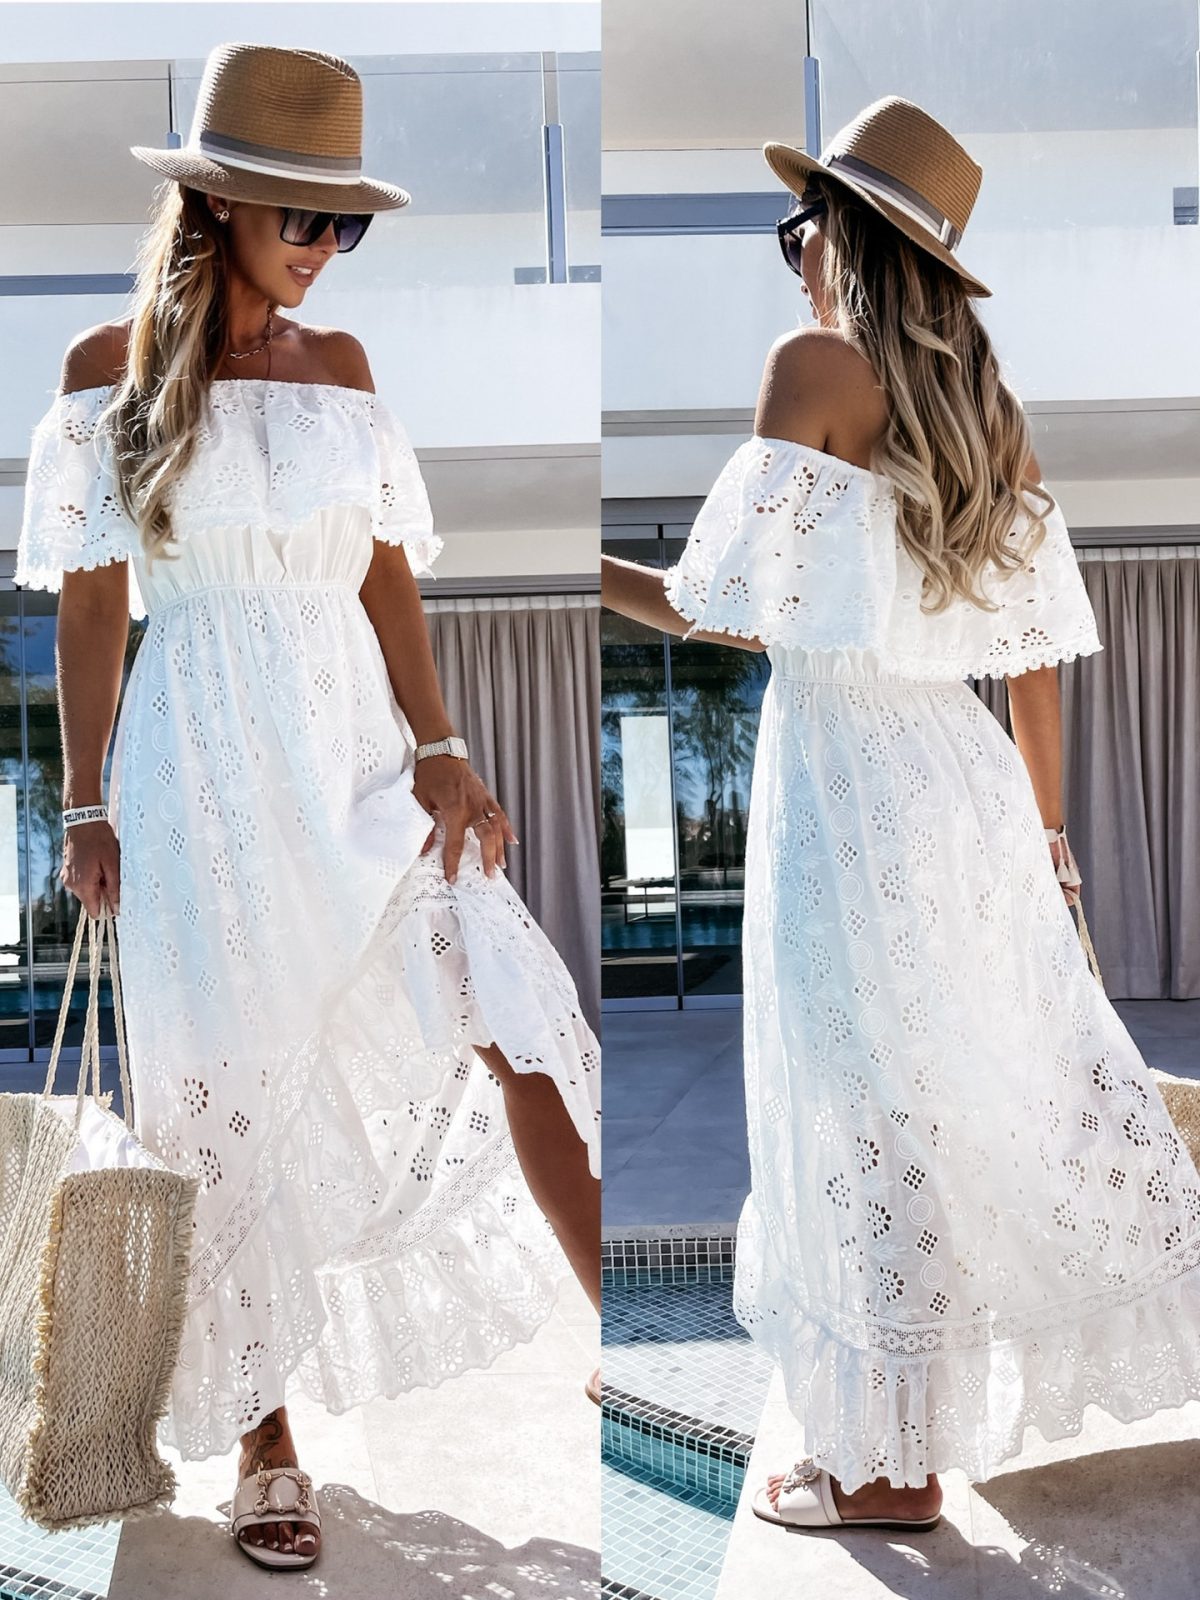 Tube Top off-Shoulder Sexy Bohemian White Beach Dress - Bohemian White Beach Dress - Uniqistic.com